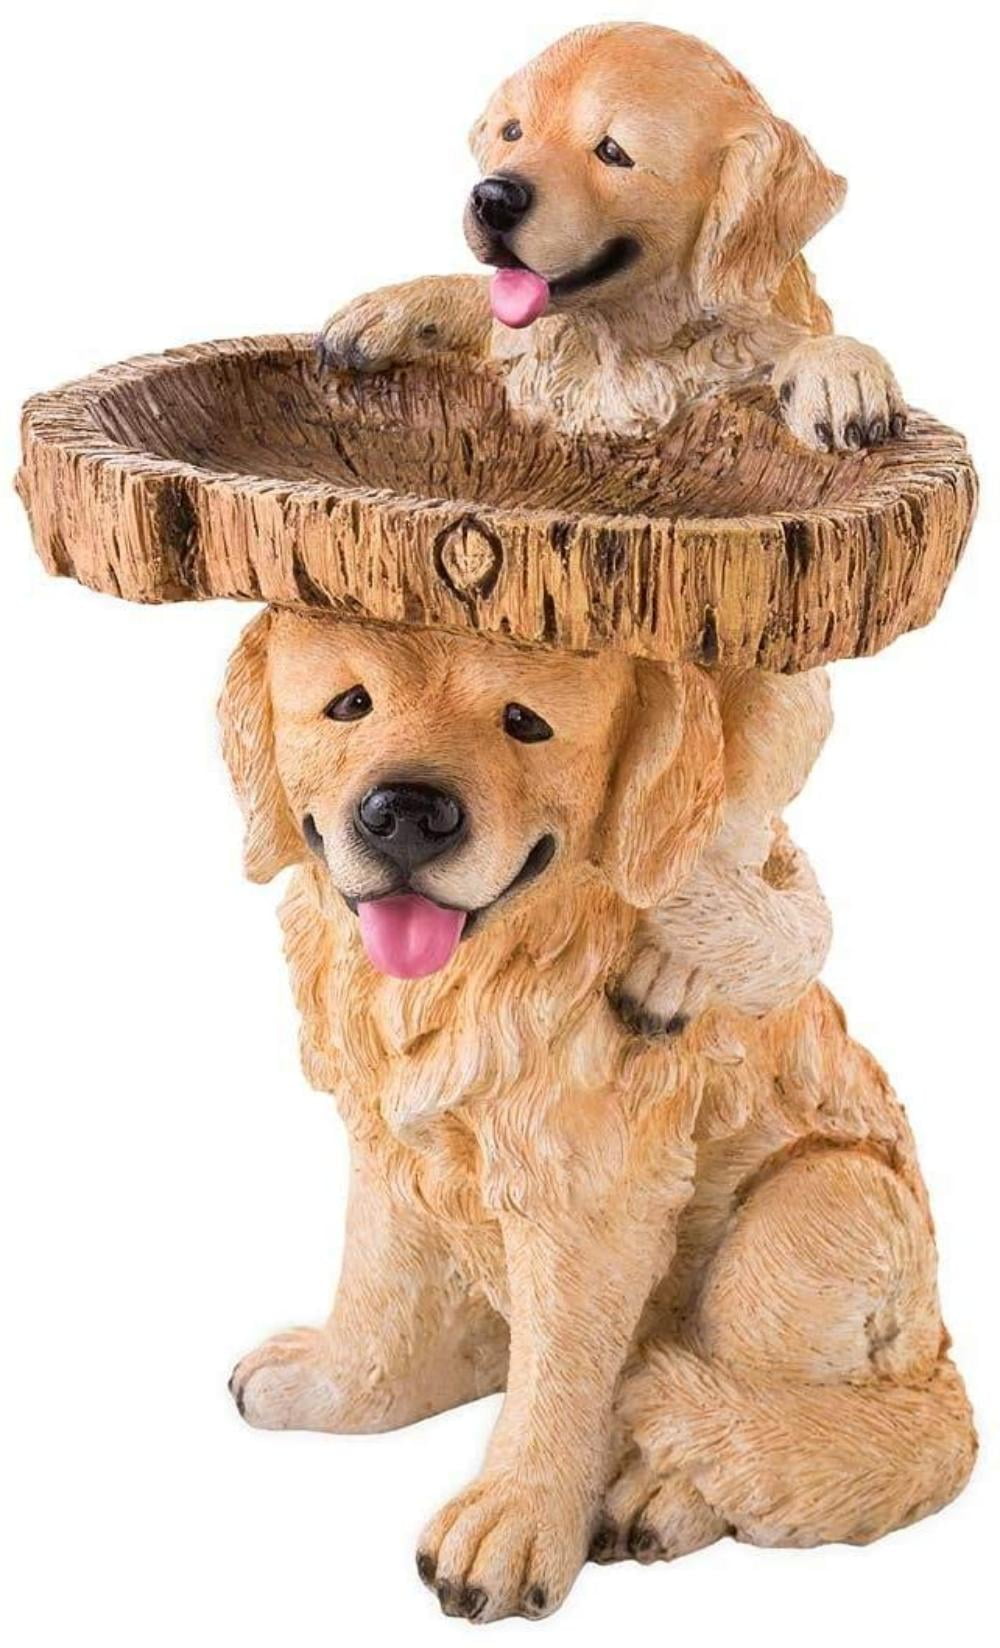 Two Playful Golden Retriever Puppies Resin Birdbath Hand-Painted All-Weather Wood-Look Resin Landscape and Garden Accent for Outdoor Garden Lawn Yard Decorations